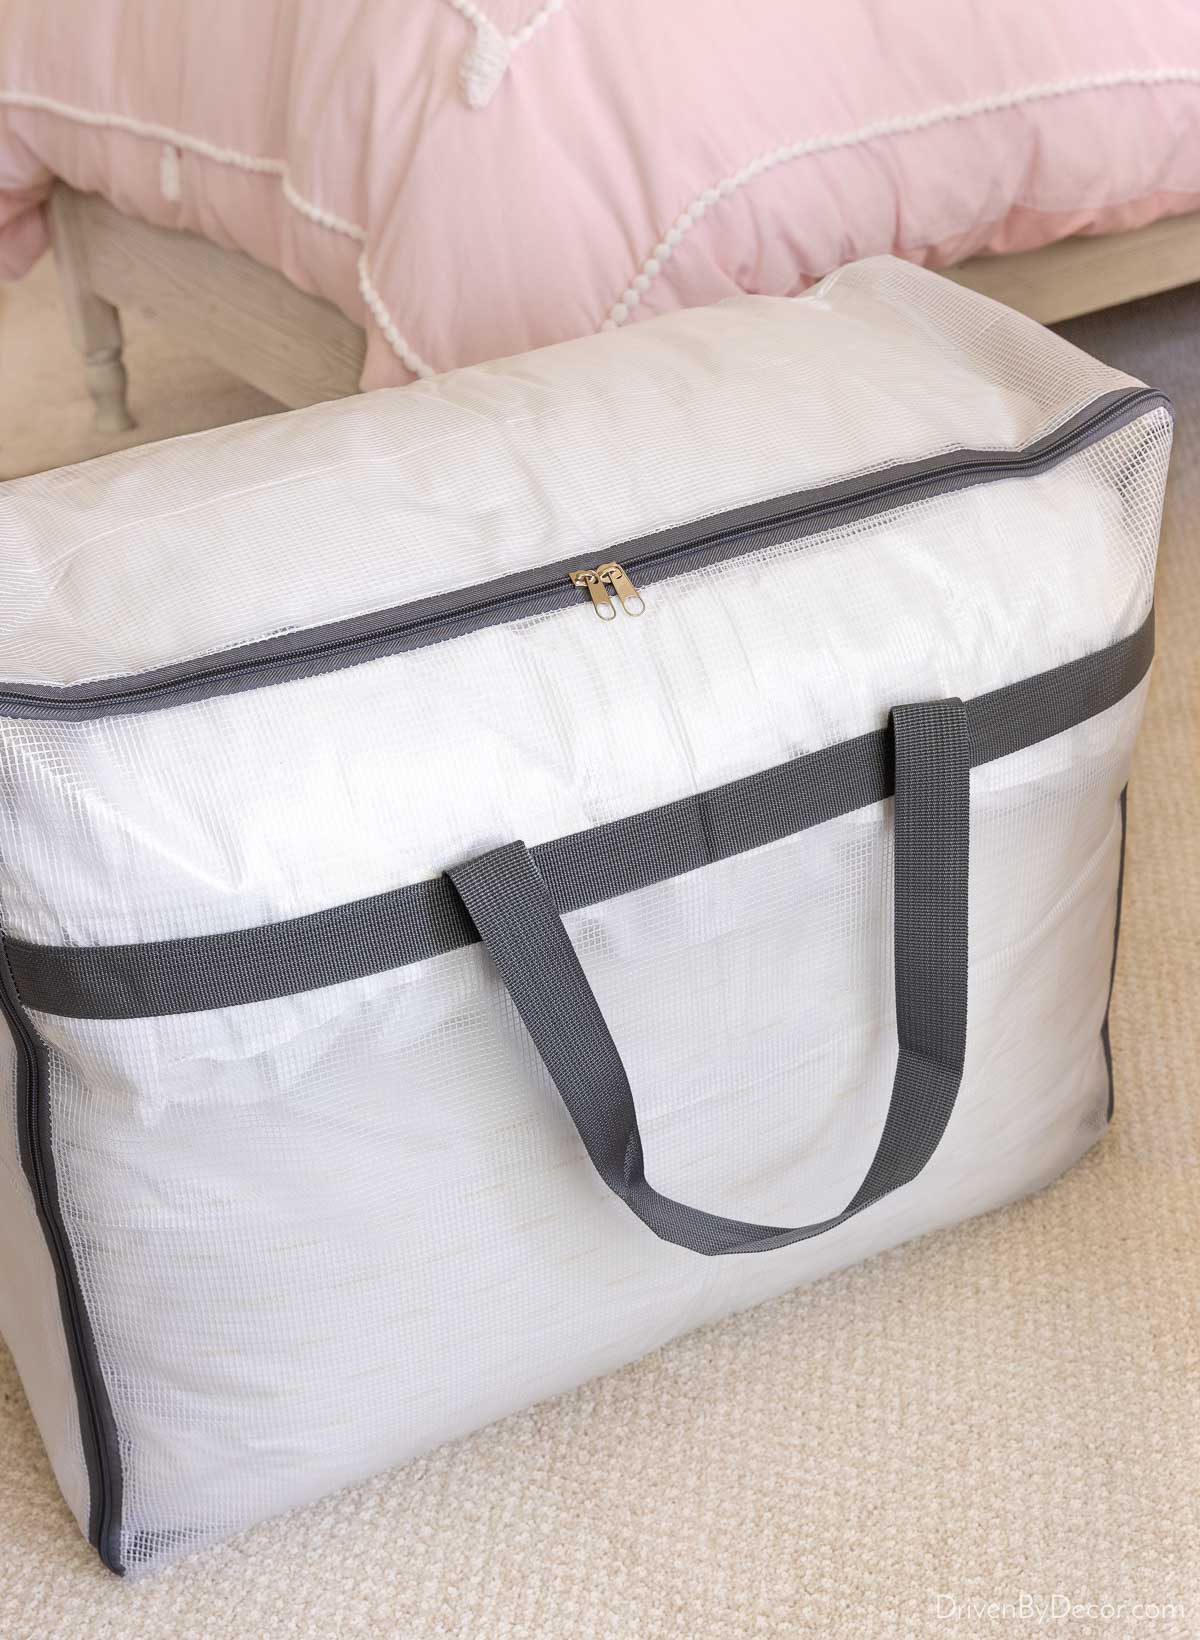 Storage bag with handles for storage of pillows and blankets in closet